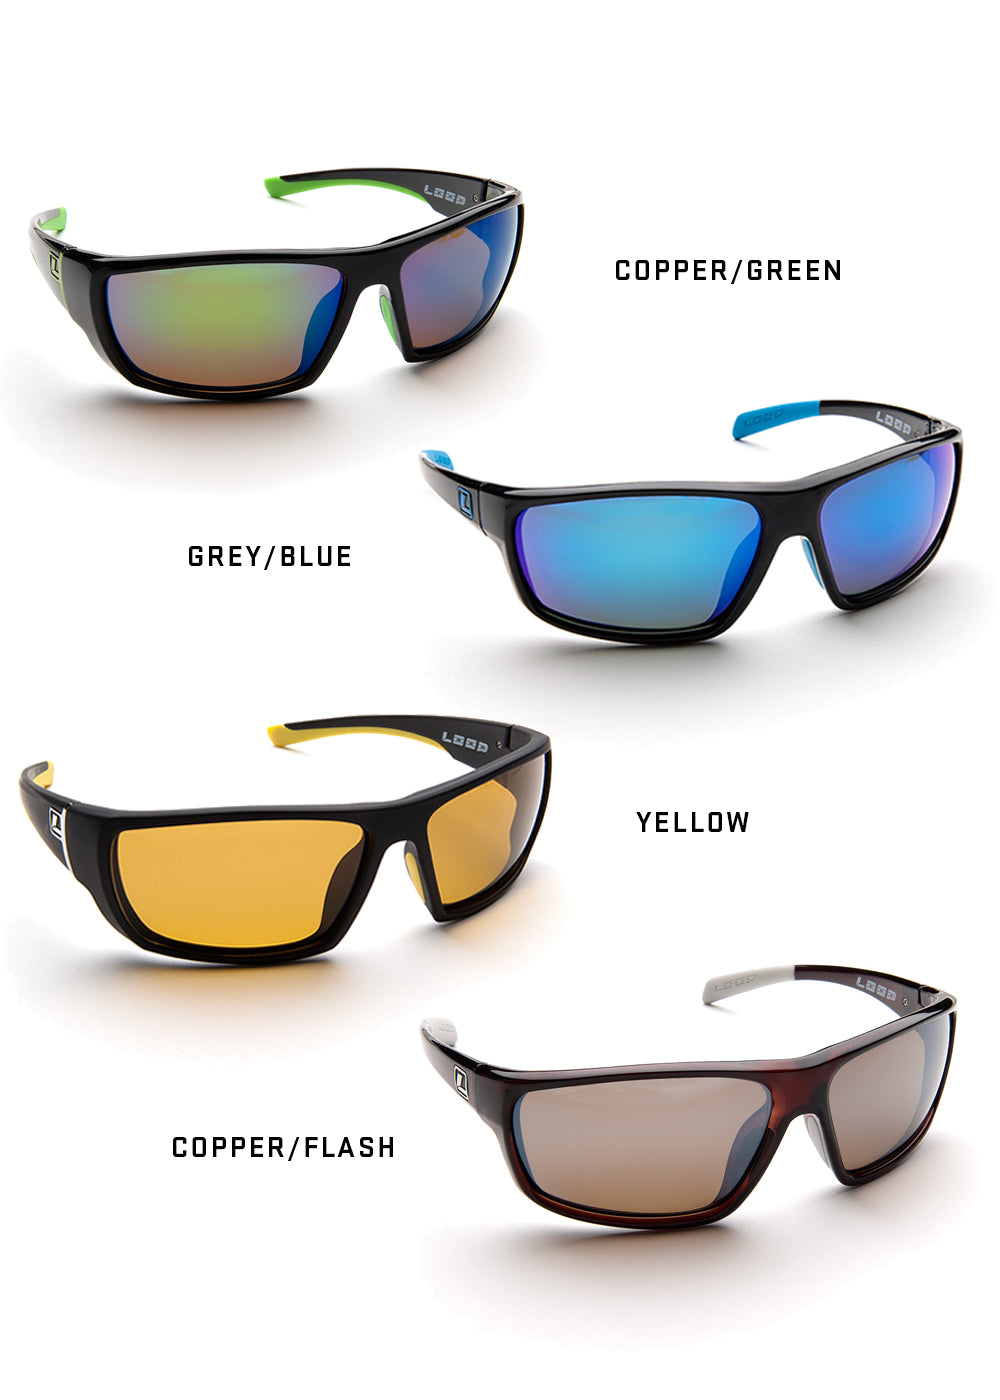 Best Polarized Lens Colors for Fly Fishing Sunglasses